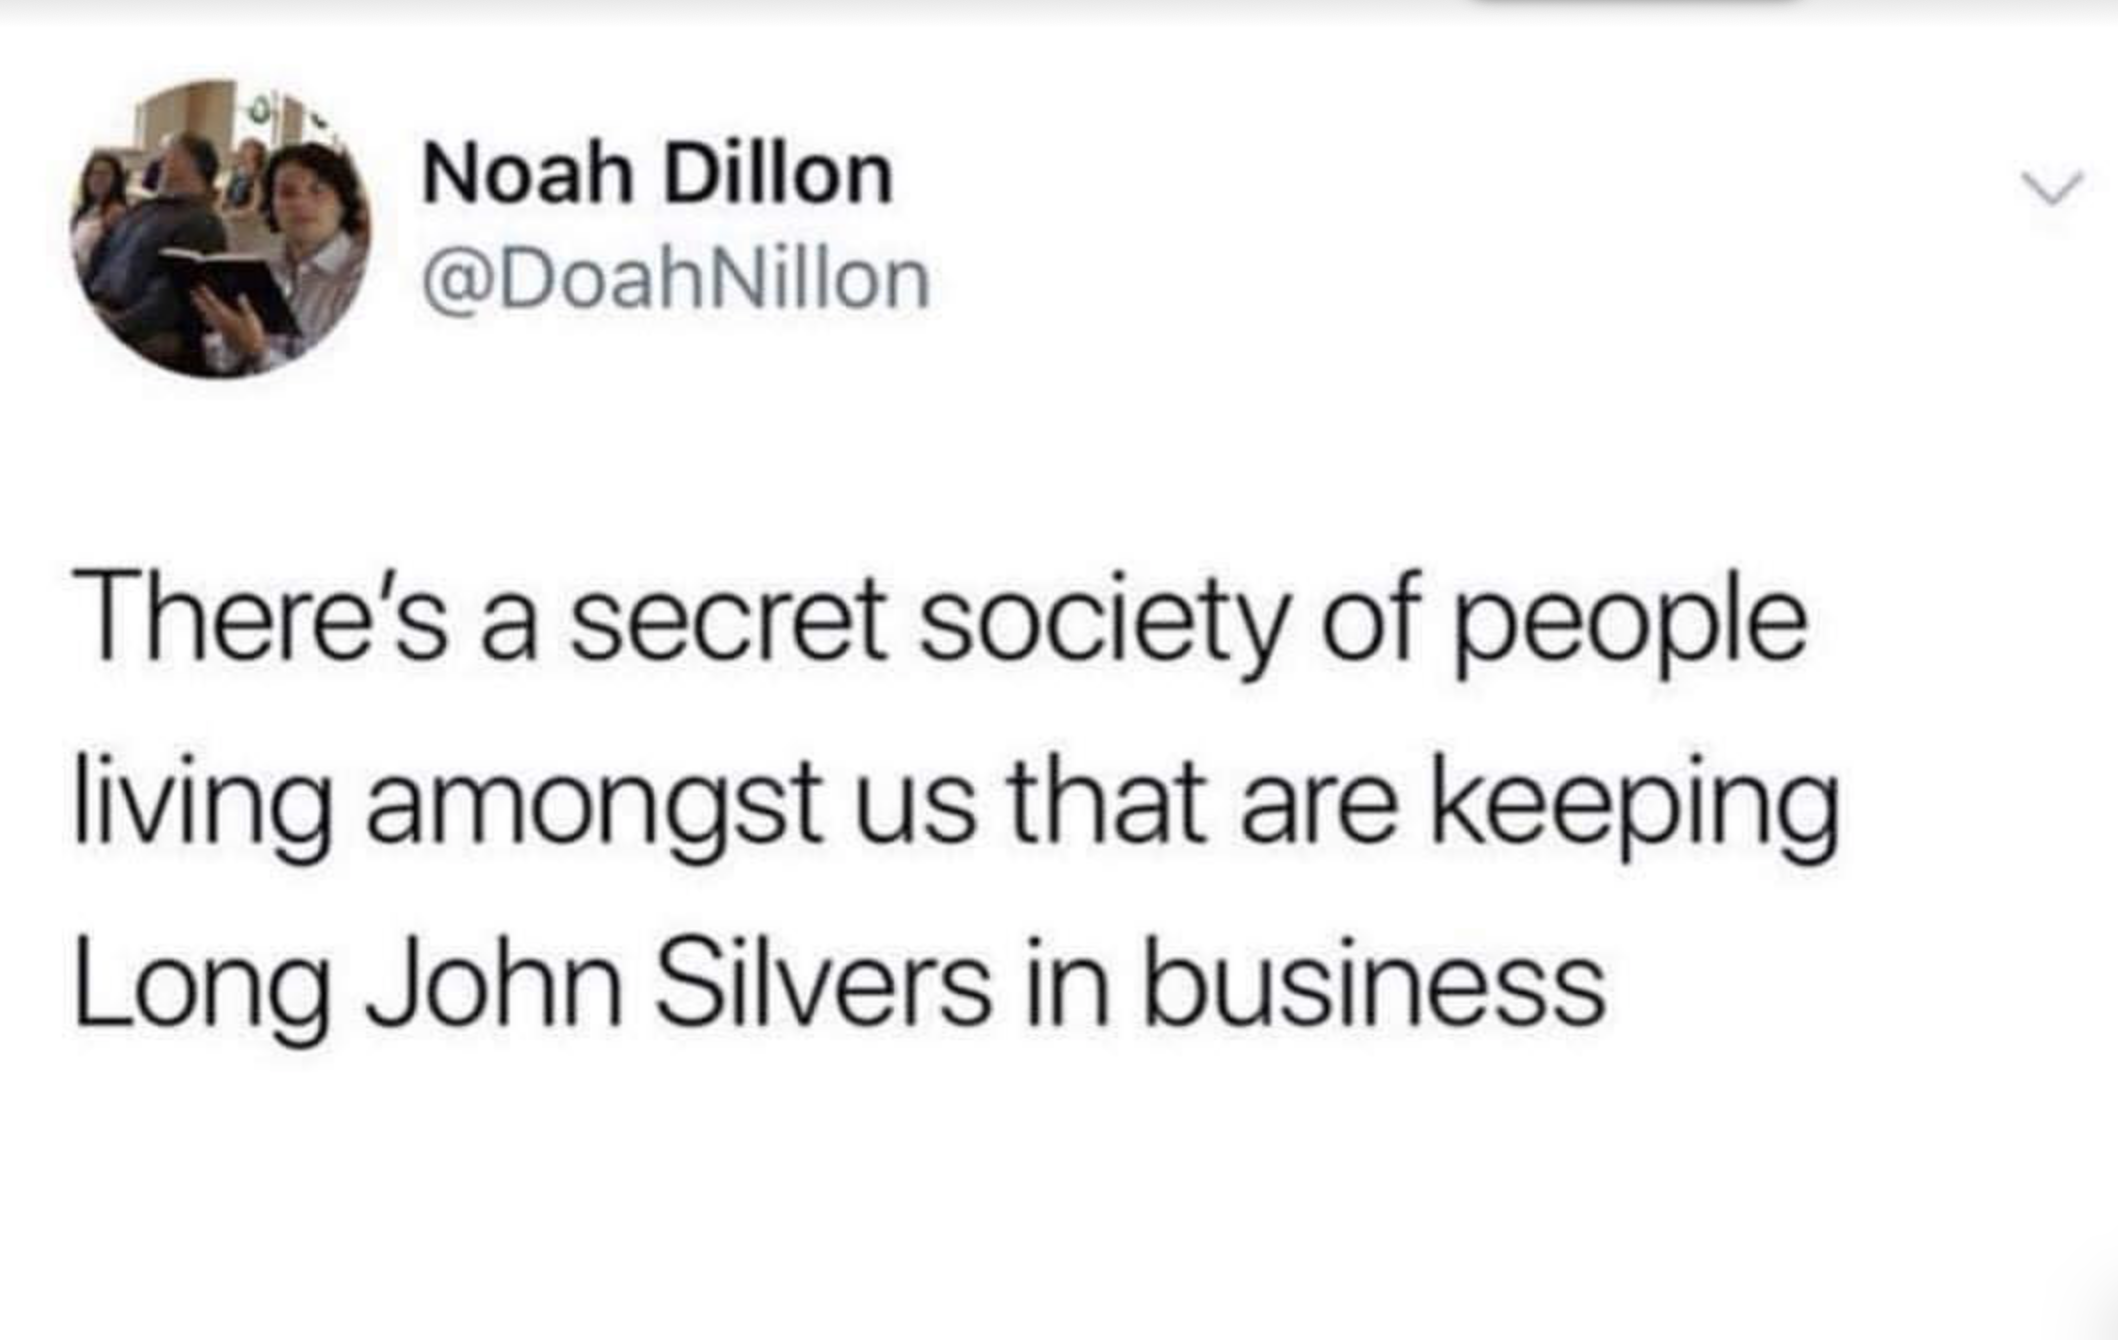 document - Noah Dillon There's a secret society of people living amongst us that are keeping Long John Silvers in business